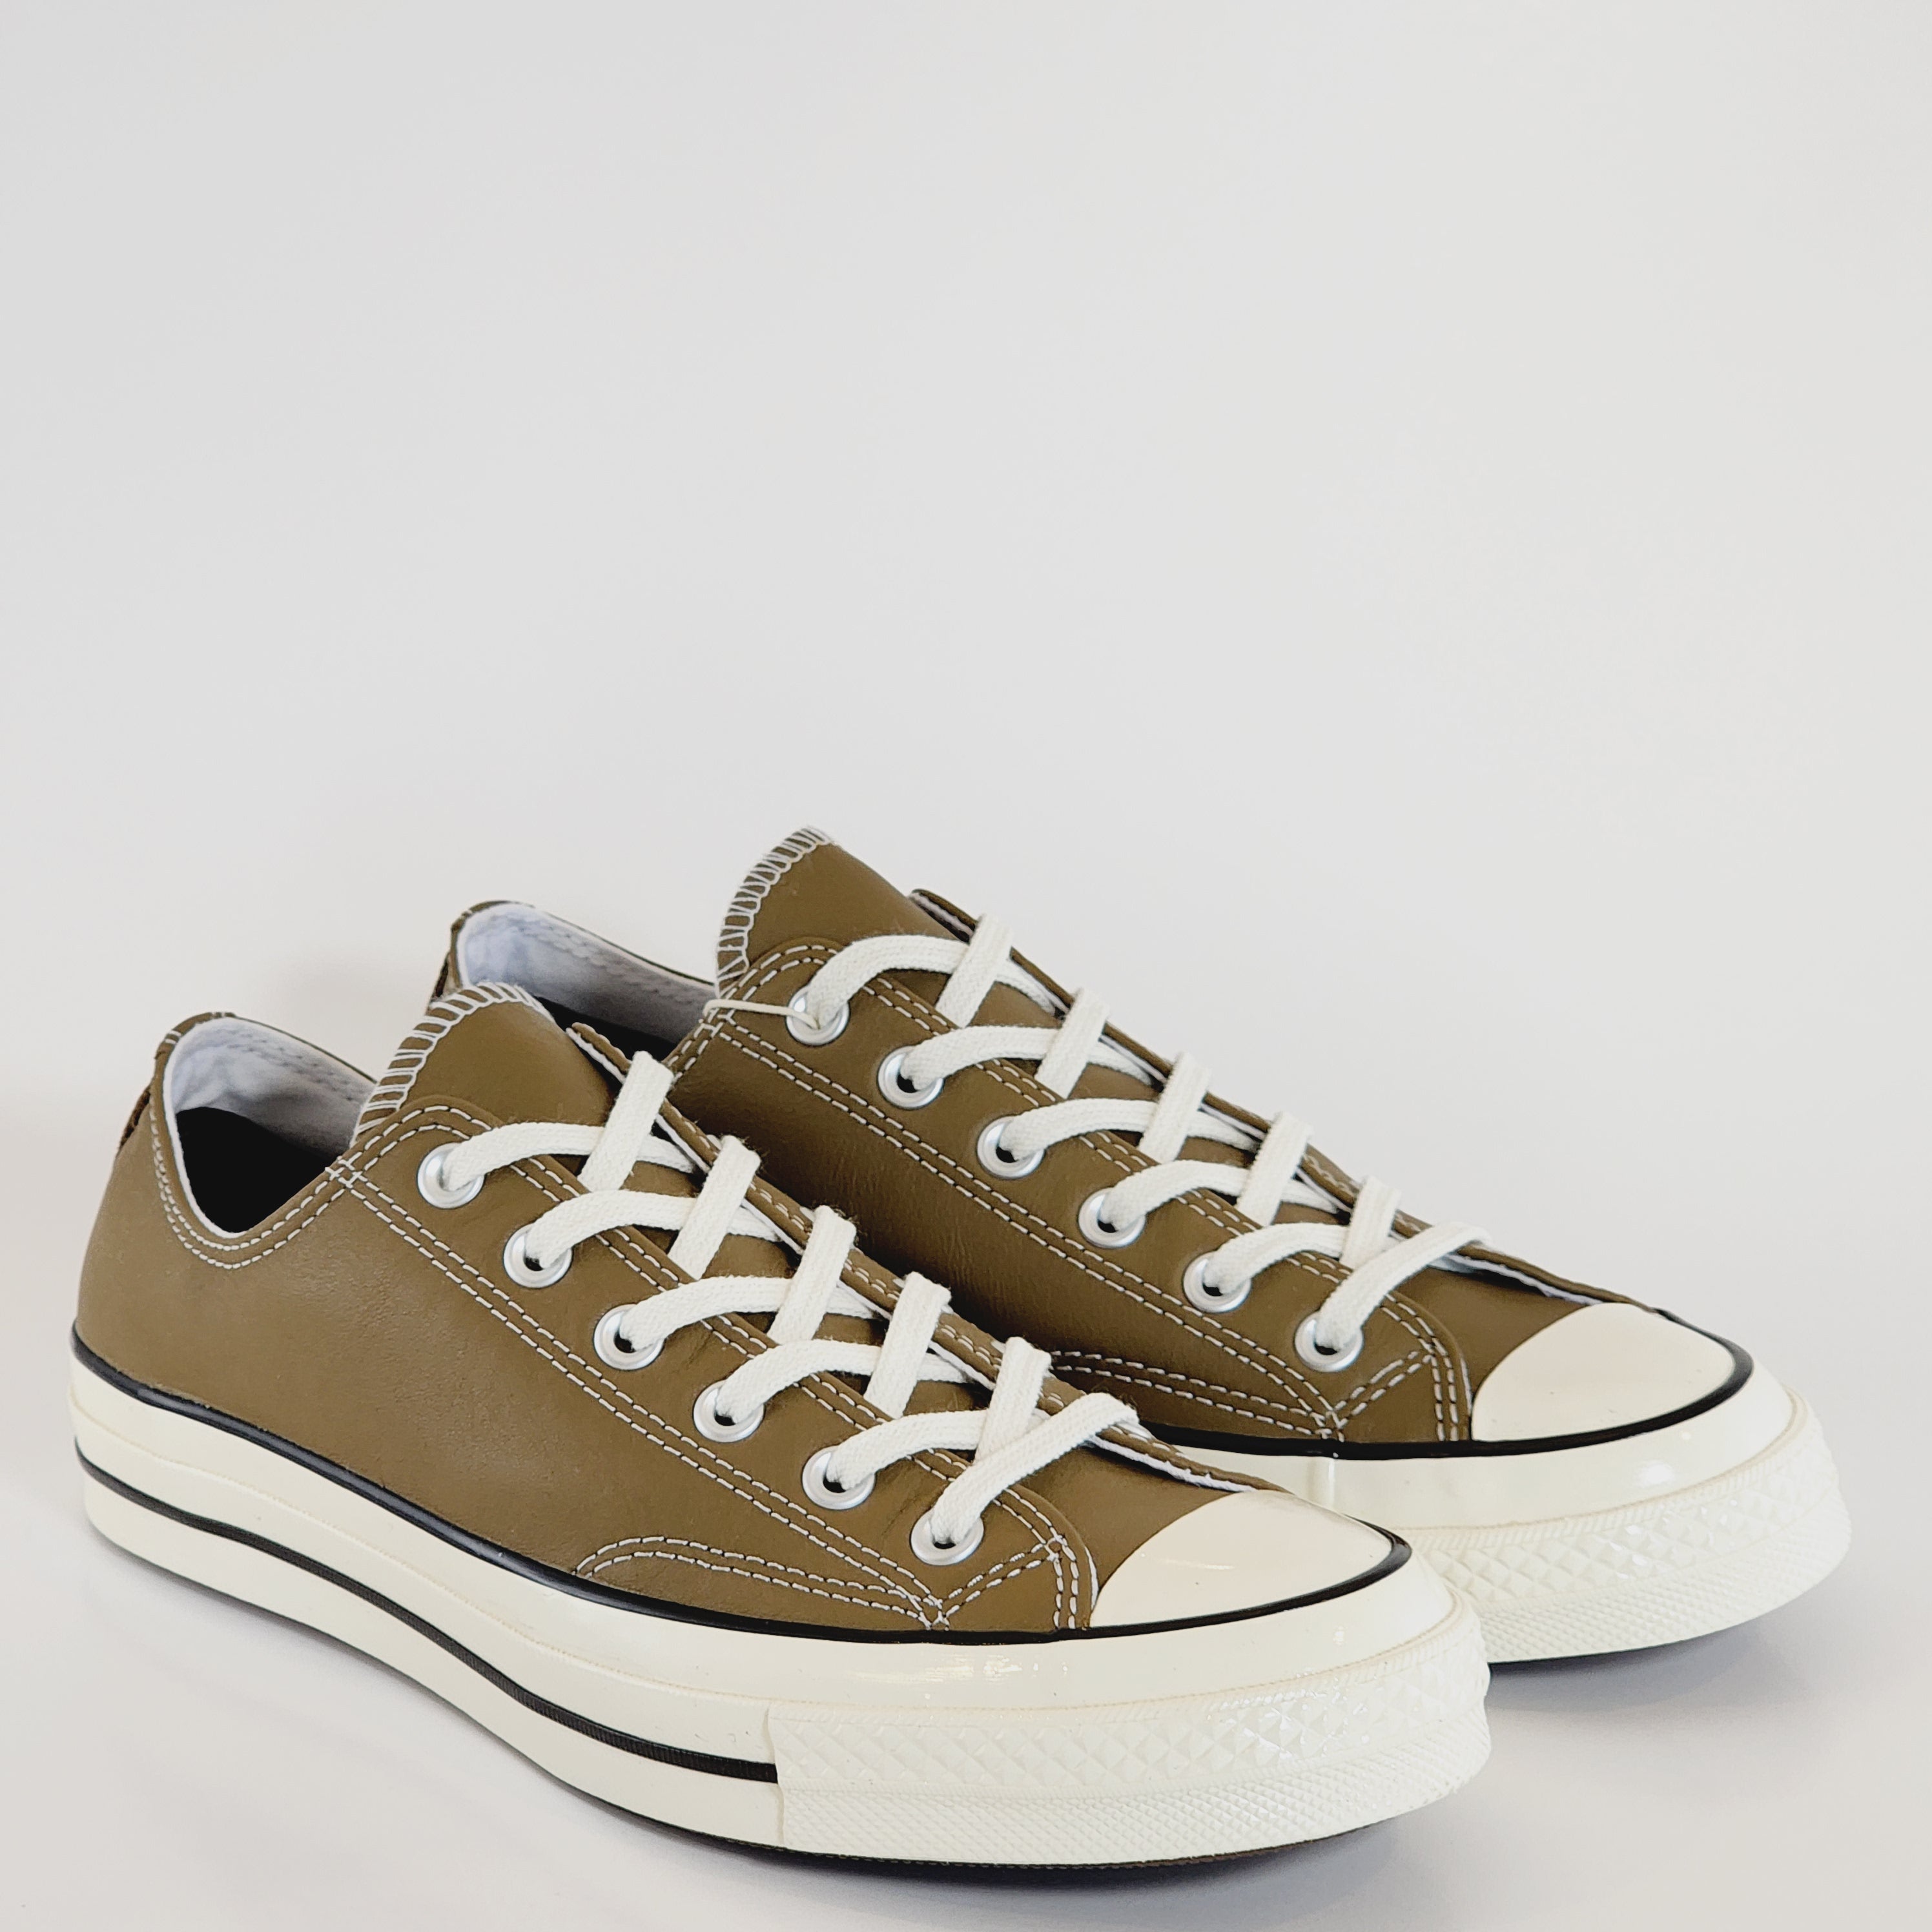 Converse Chuck 70 Ox Sand Dune/Egret/Black Leather Unisex Sneakers A09985C NWT